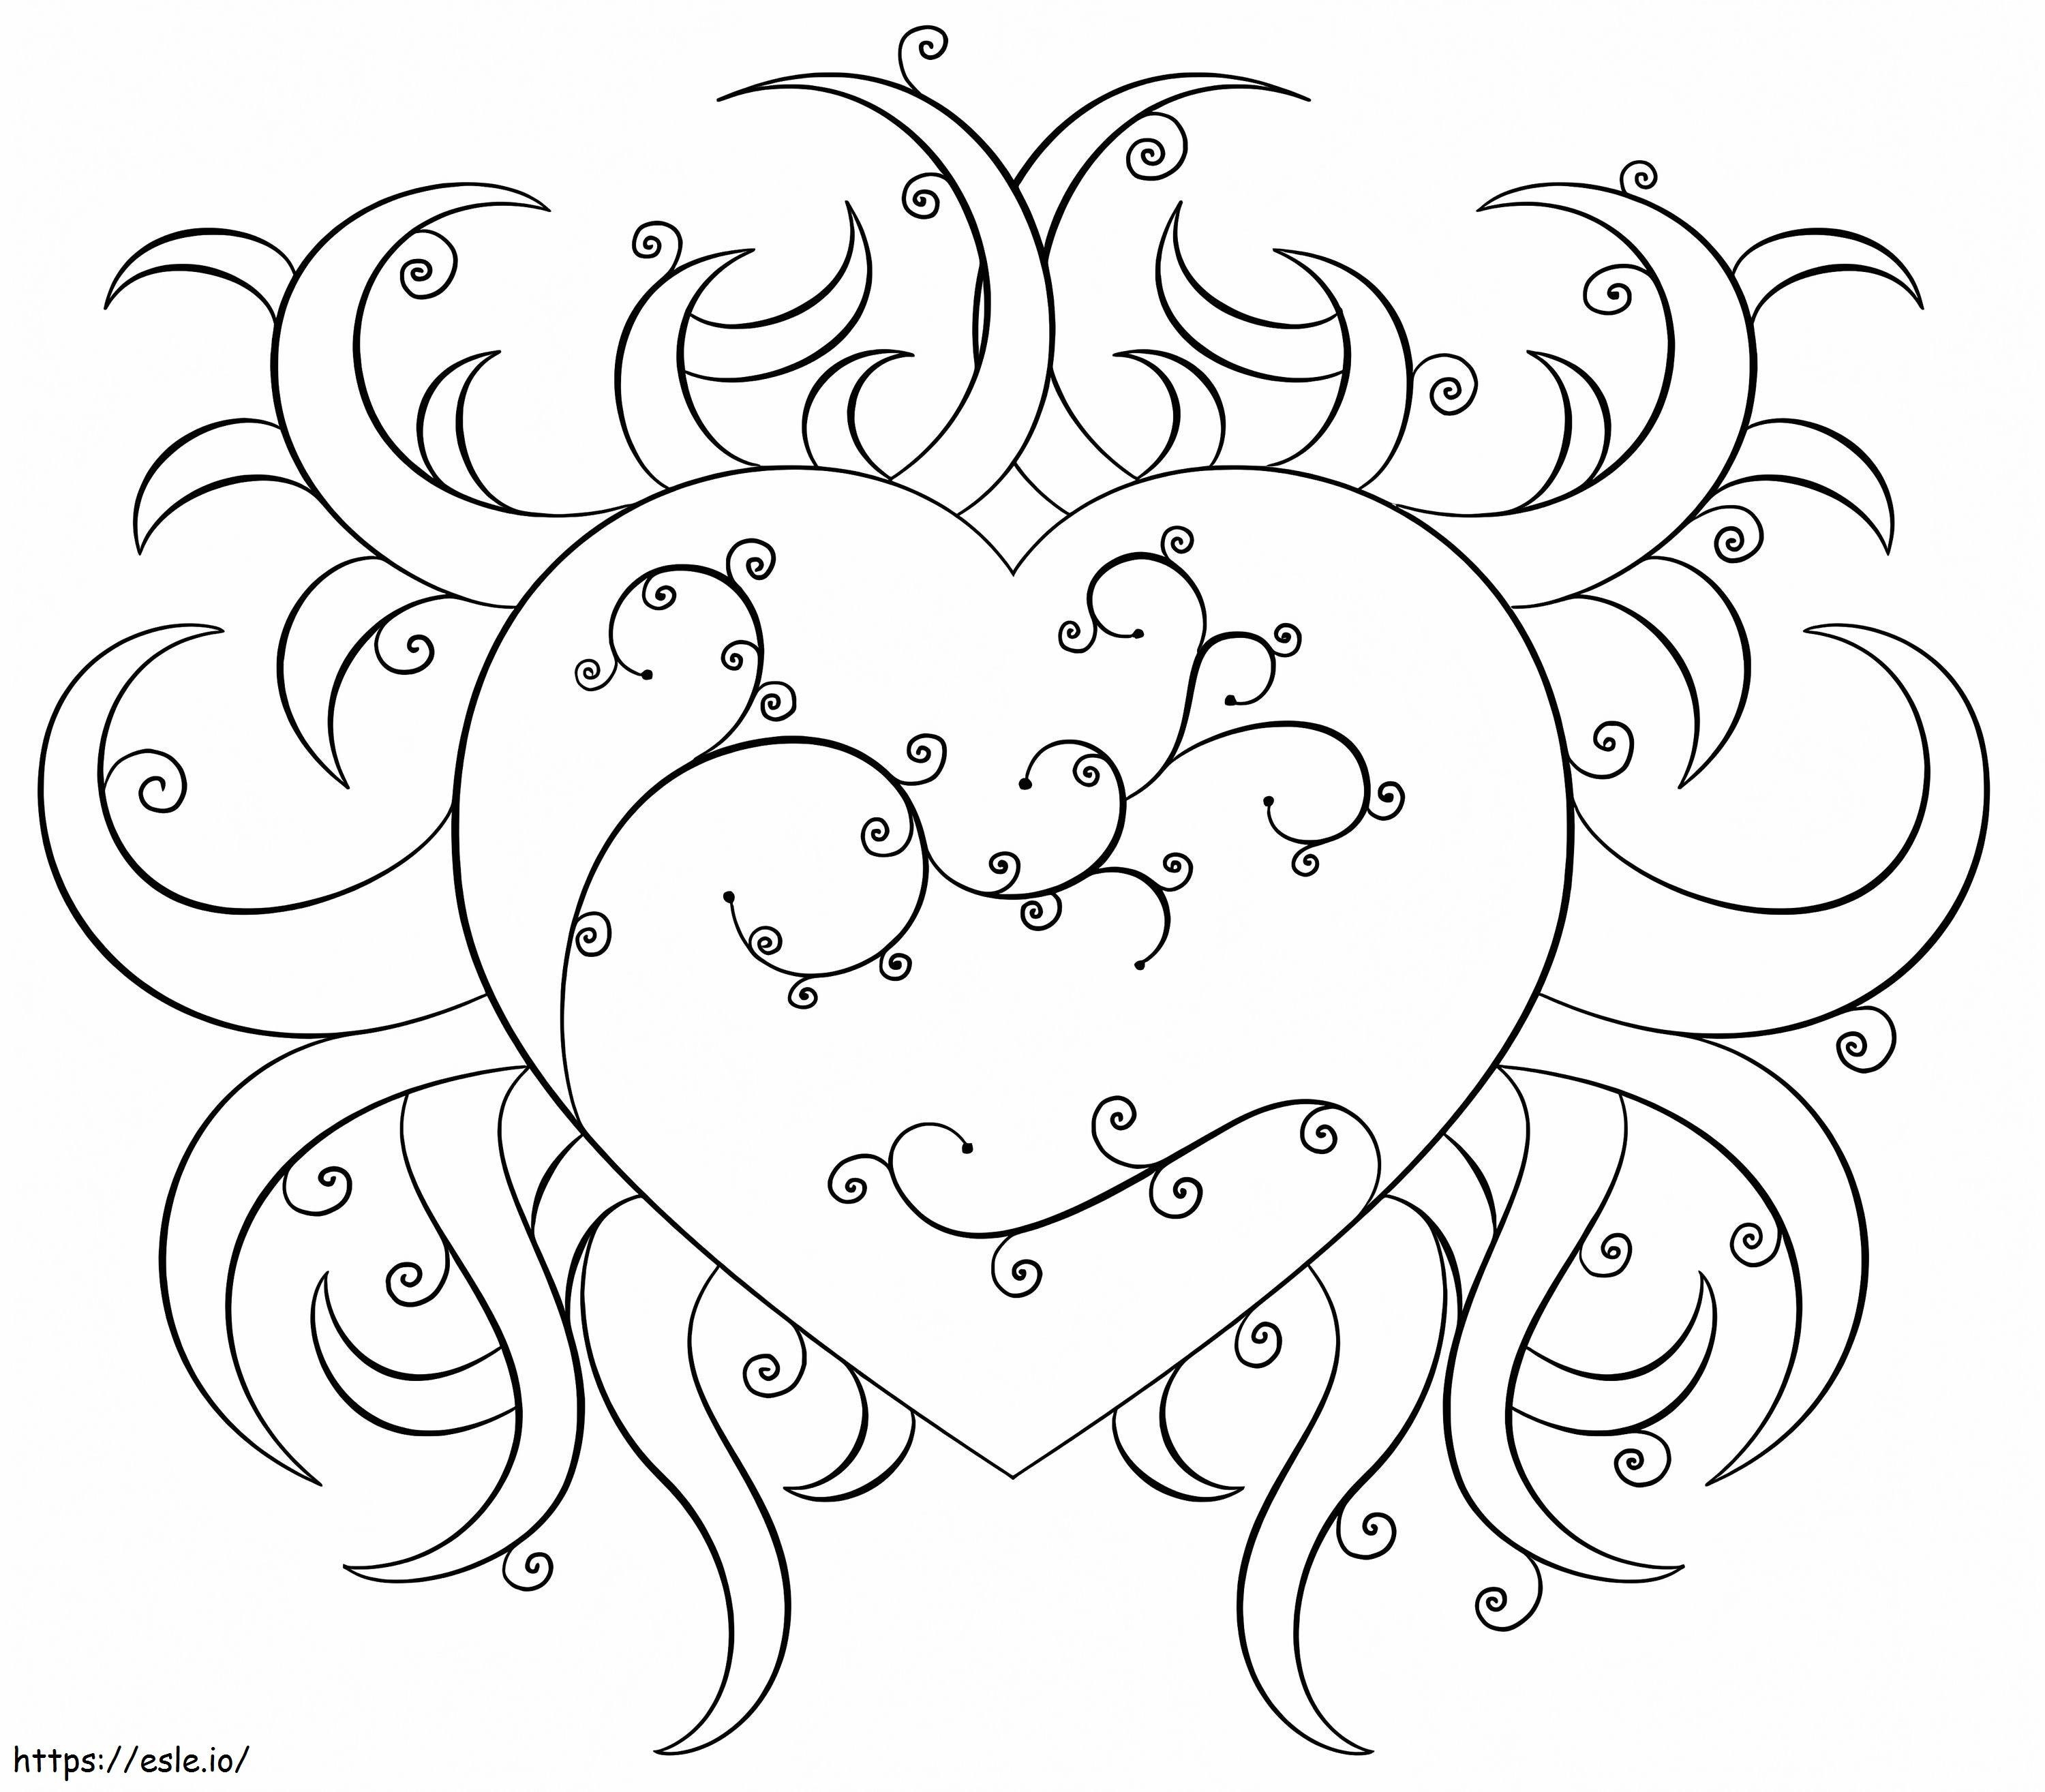 Heart Art 1 coloring page